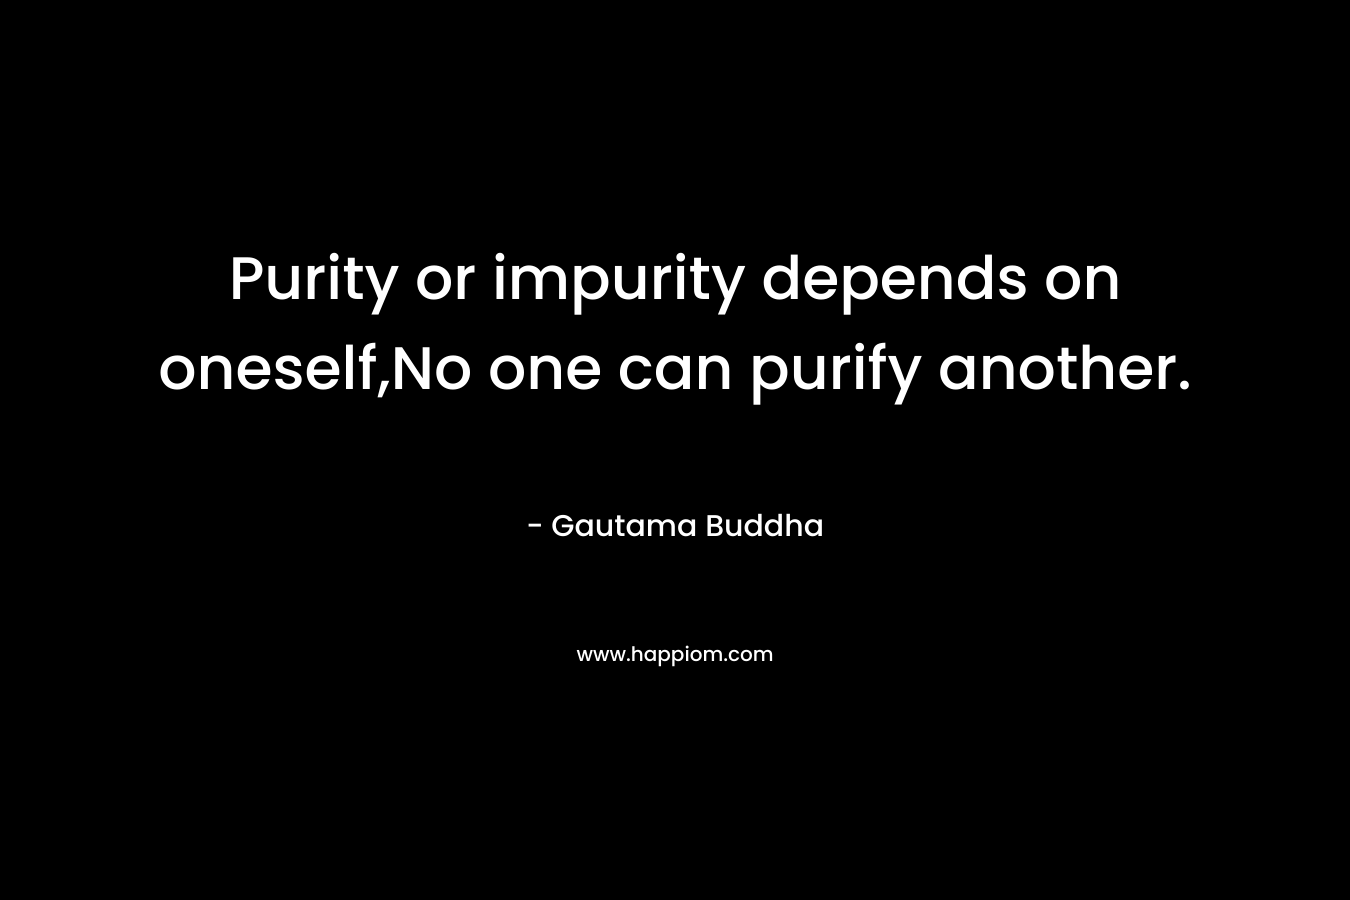 Purity or impurity depends on oneself,No one can purify another. – Gautama Buddha